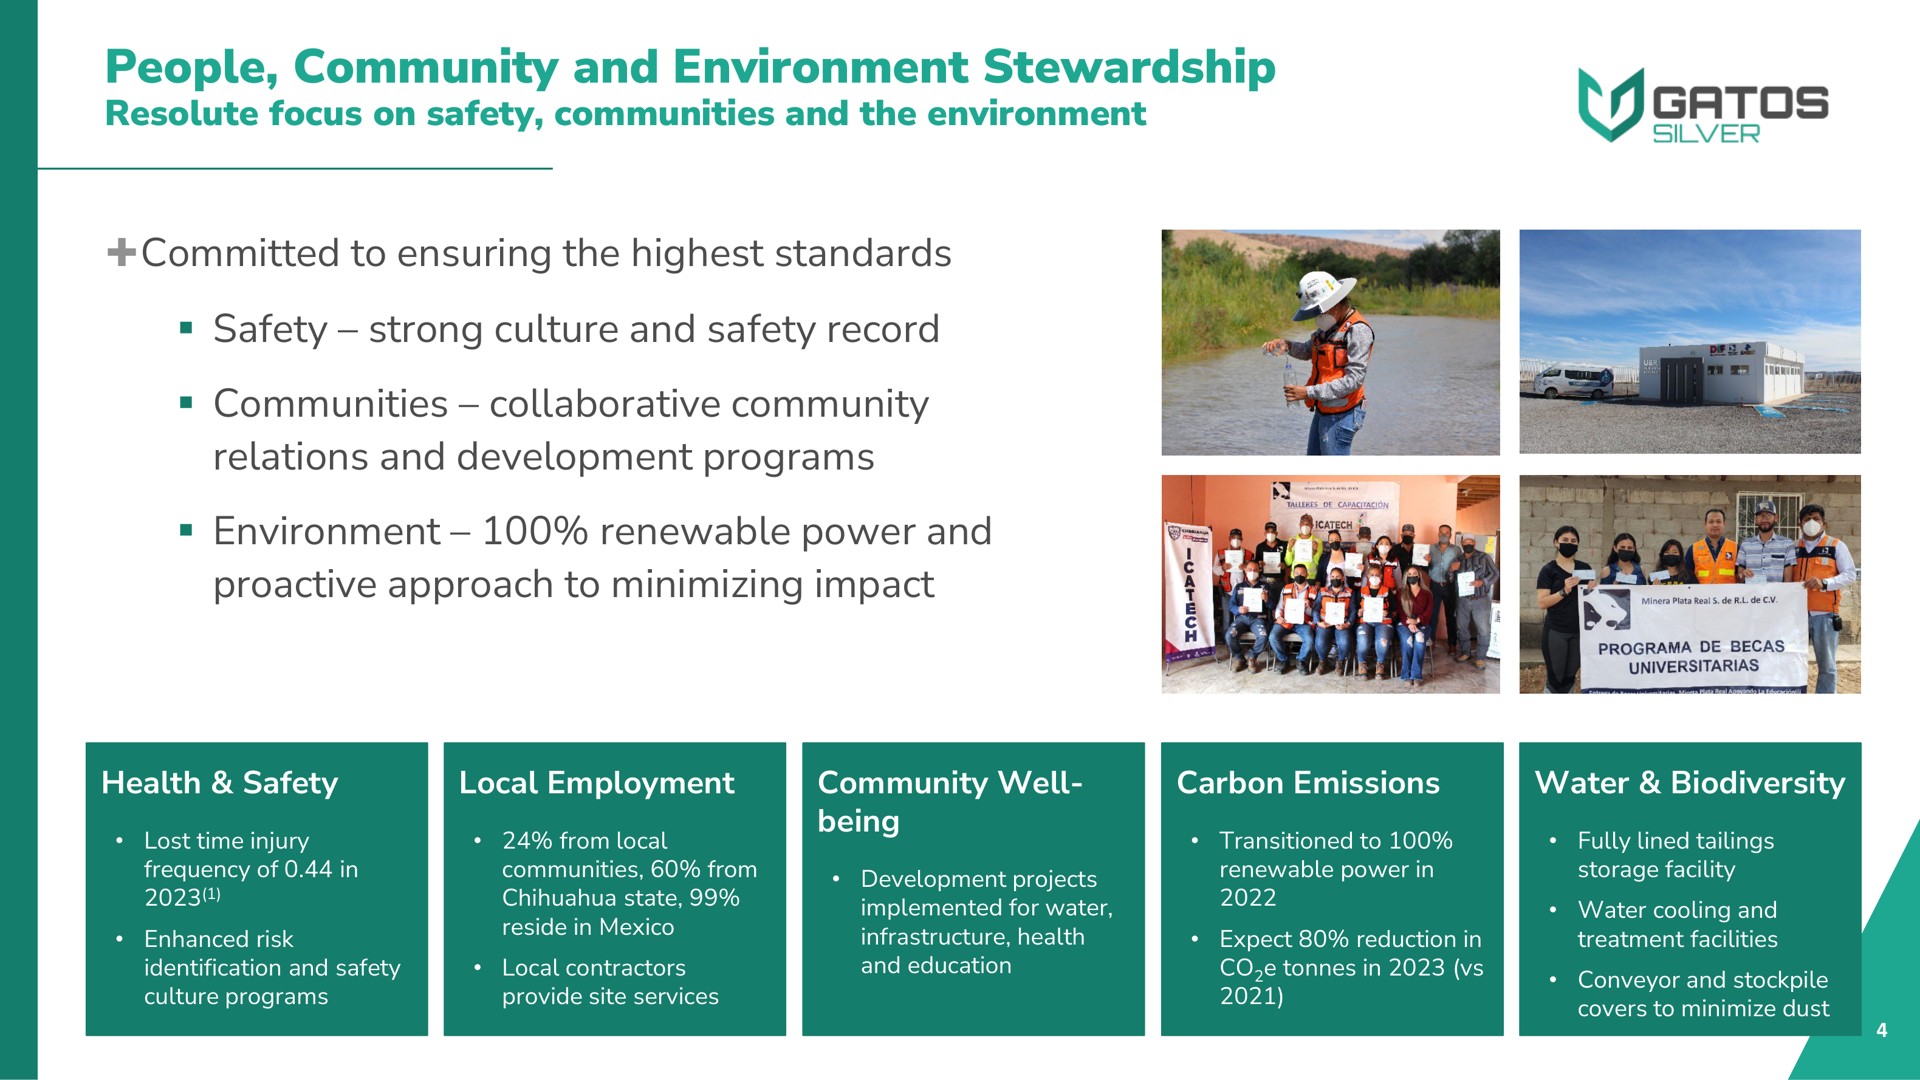 people community and environment stewardship resolute focus on safety communities and the environment committed to ensuring the highest standards safety strong culture and safety record communities collaborative community relations and development programs environment renewable power and approach to minimizing impact | Gatos Silver